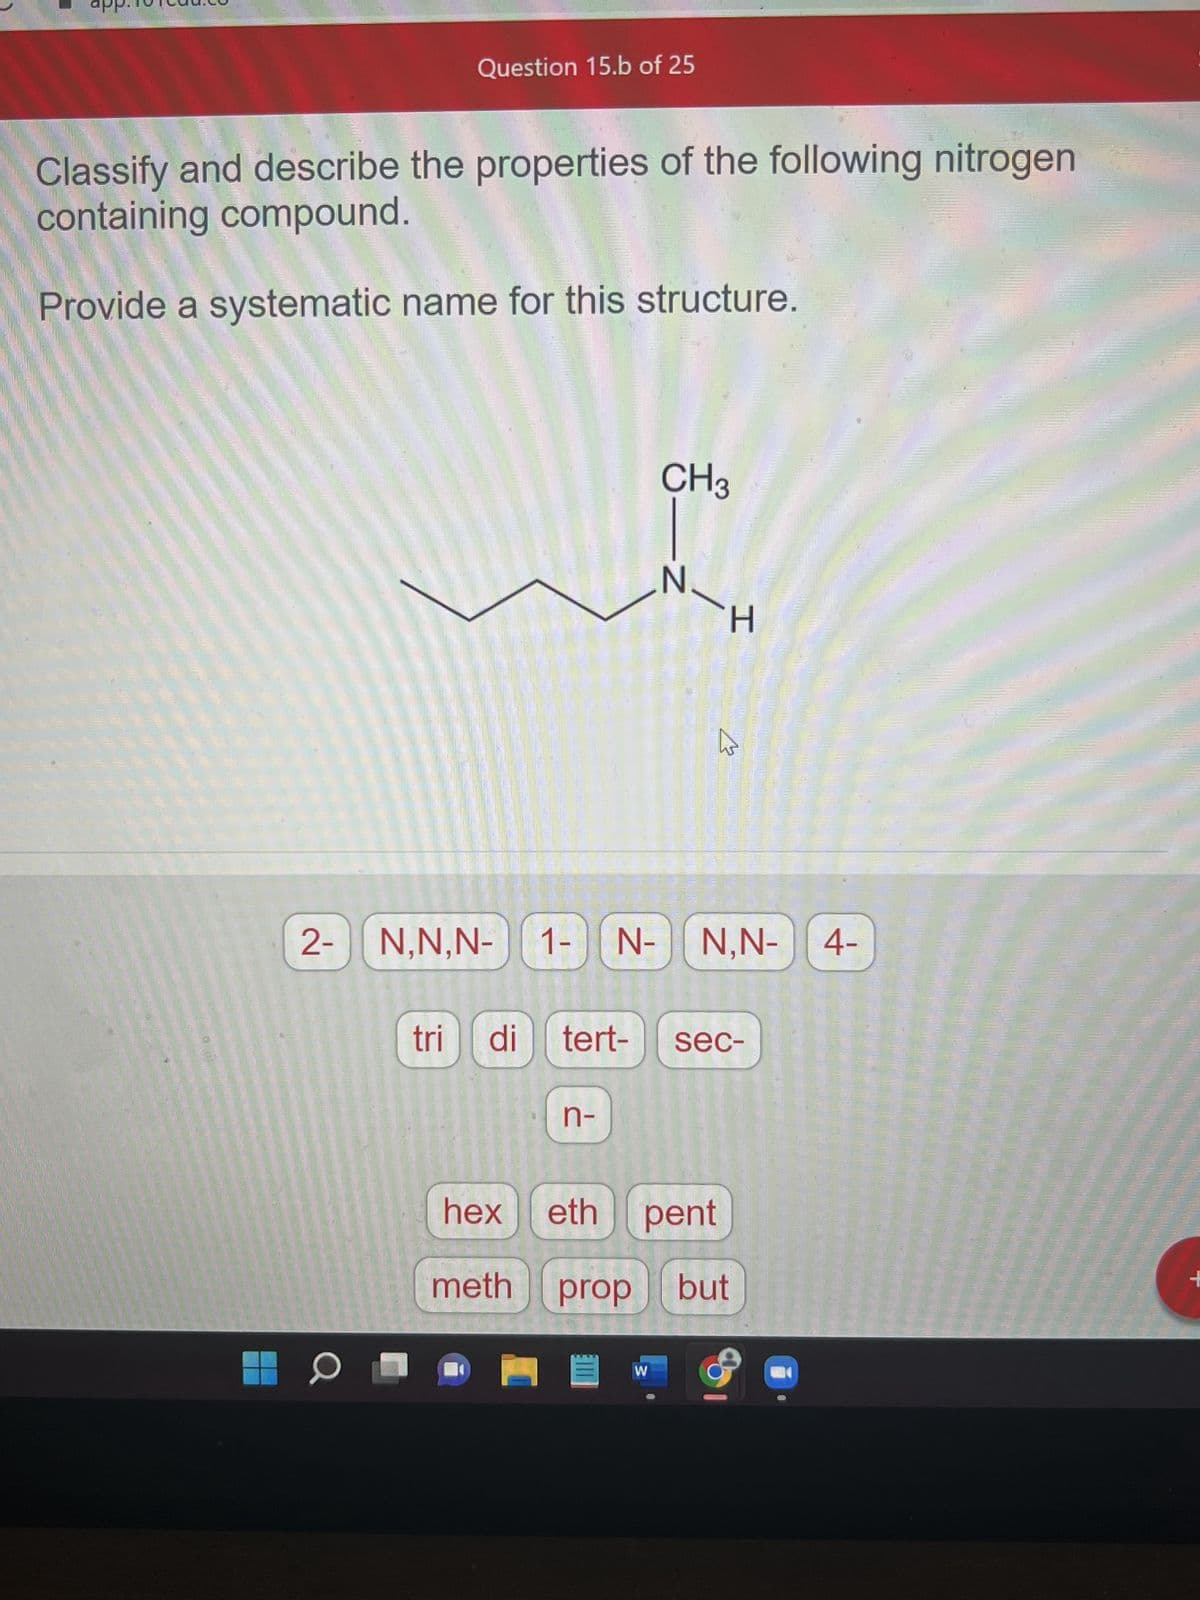 Question 15.b of 25
Classify and describe the properties of the following nitrogen
containing compound.
Provide a systematic name for this structure.
2- N,N,N-
0
1- N-
meth
n-
prop
CH3
Ell
-Z
tri di tert- sec-
hex eth pent
W
N
H
W
N,N- 4-
but
+